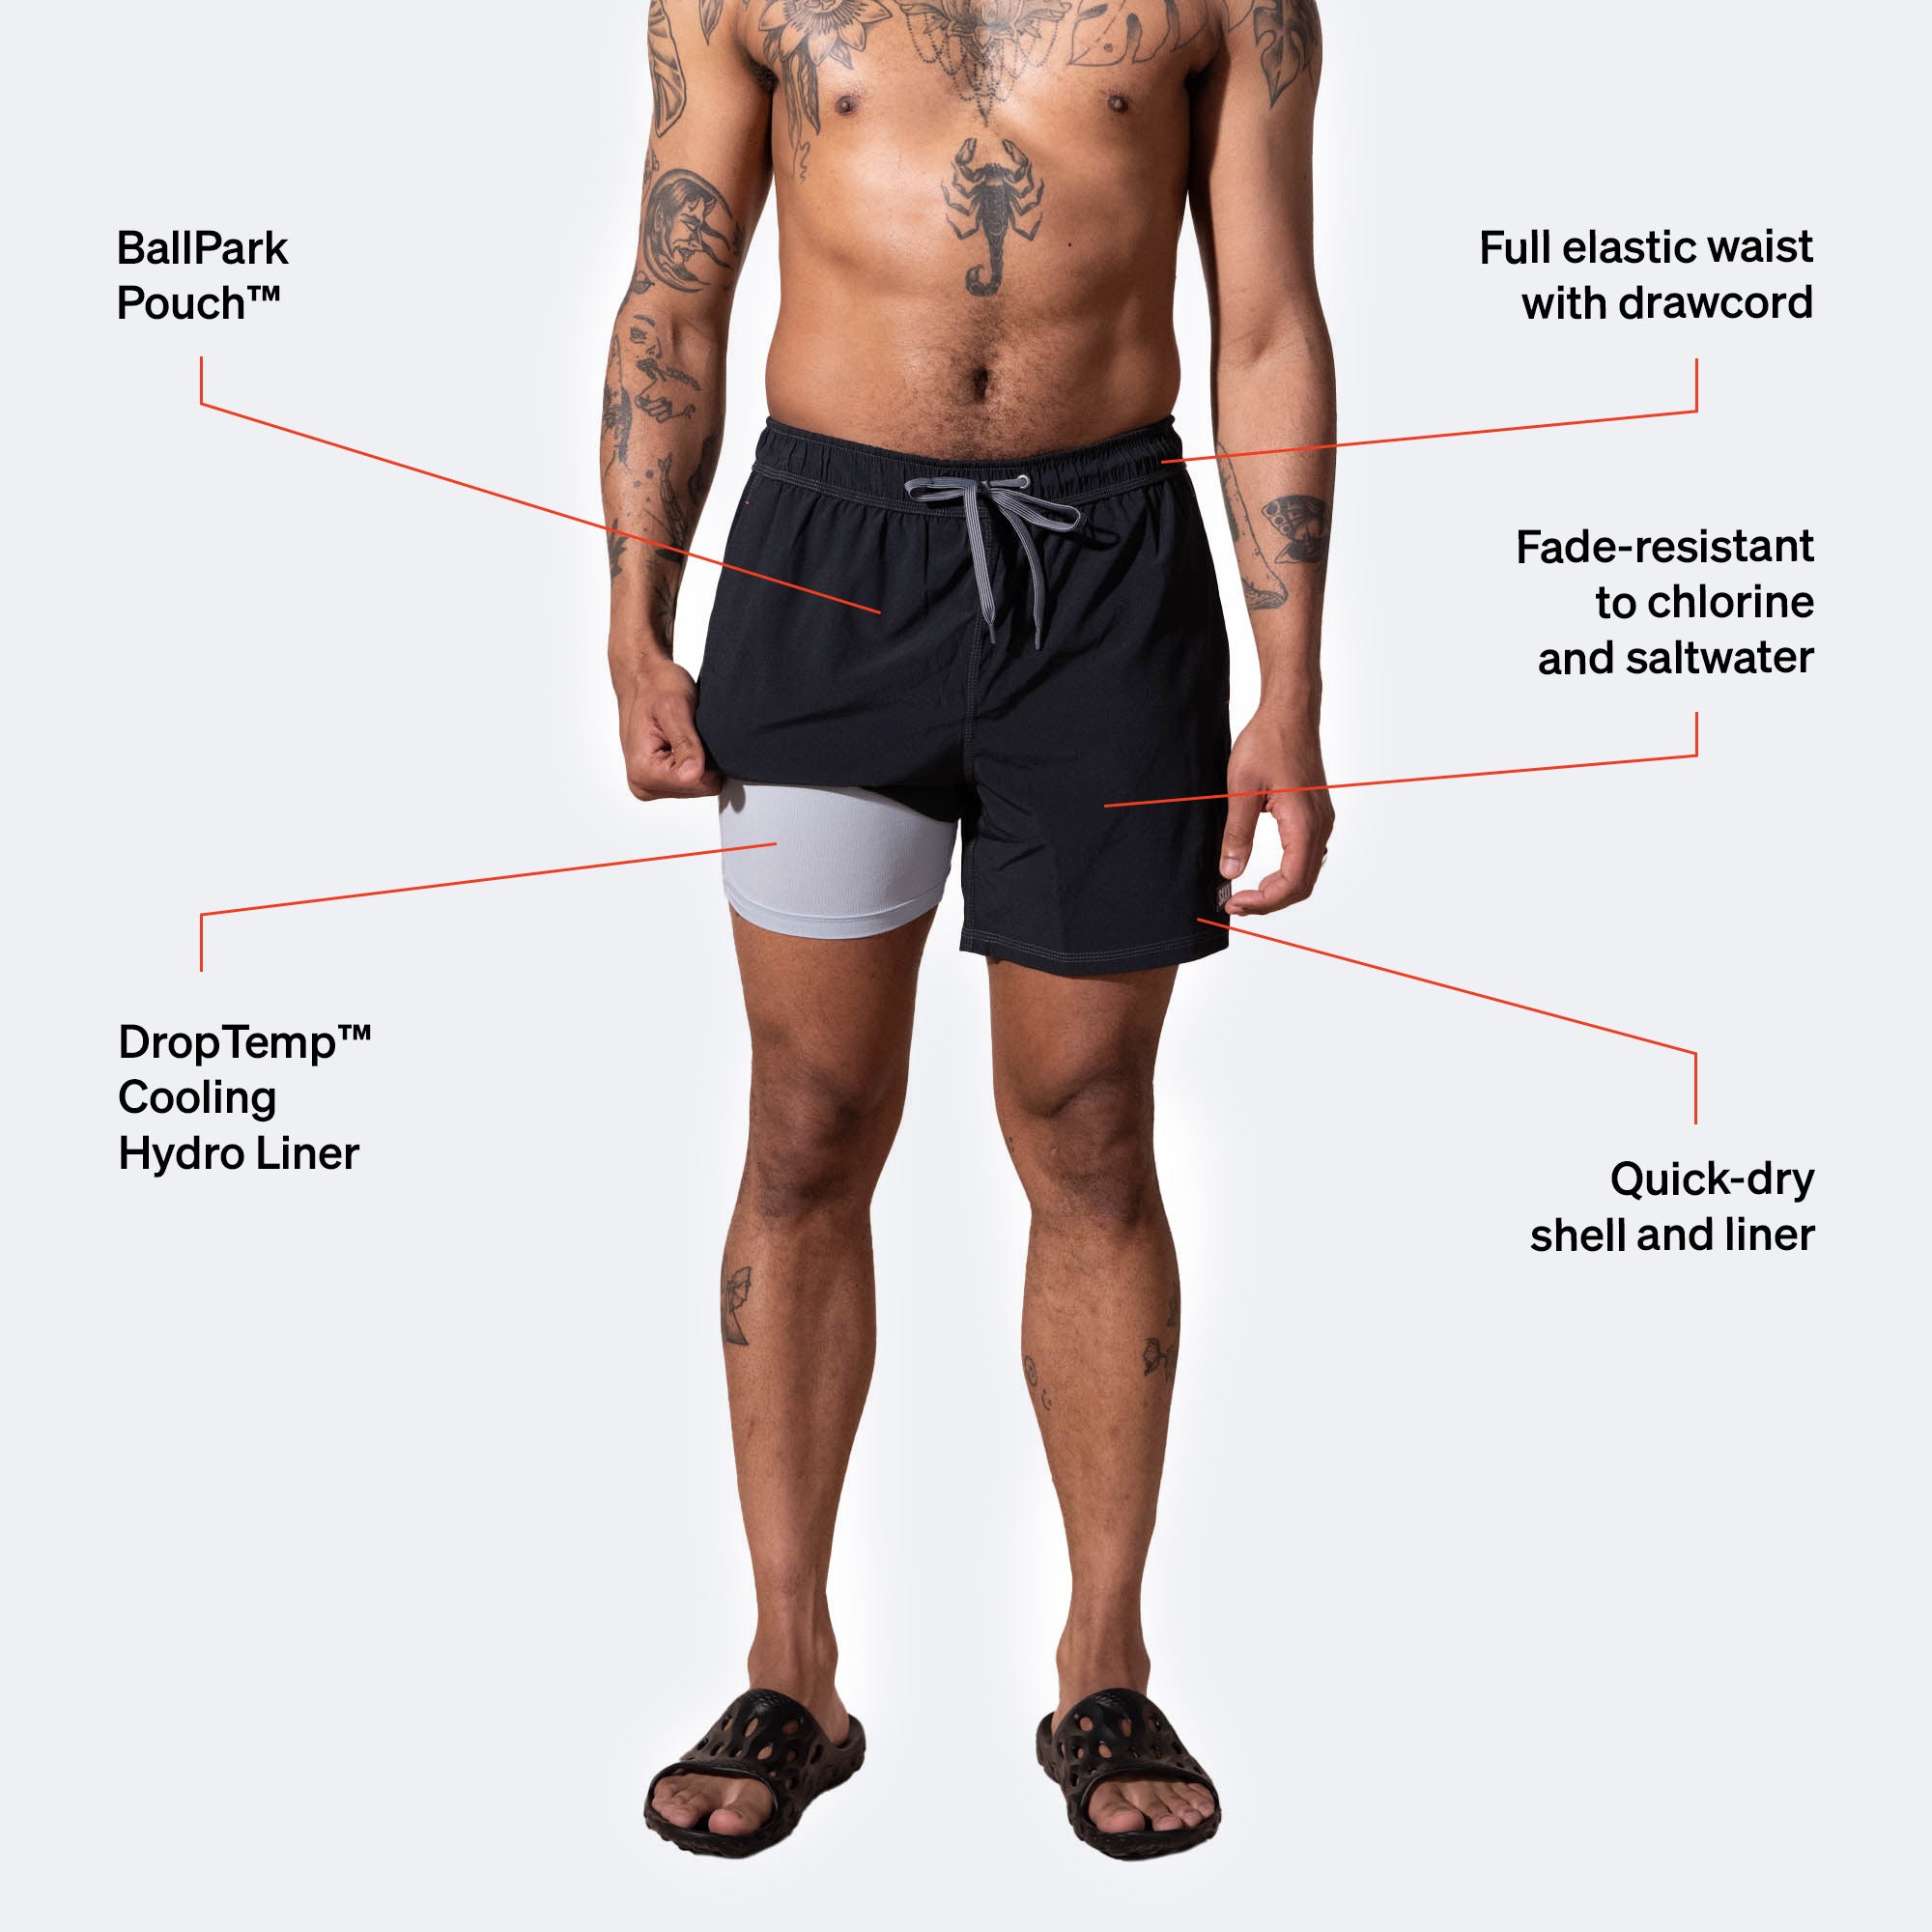 Man in black swim shorts and sandals lifting short leg to reveal liner